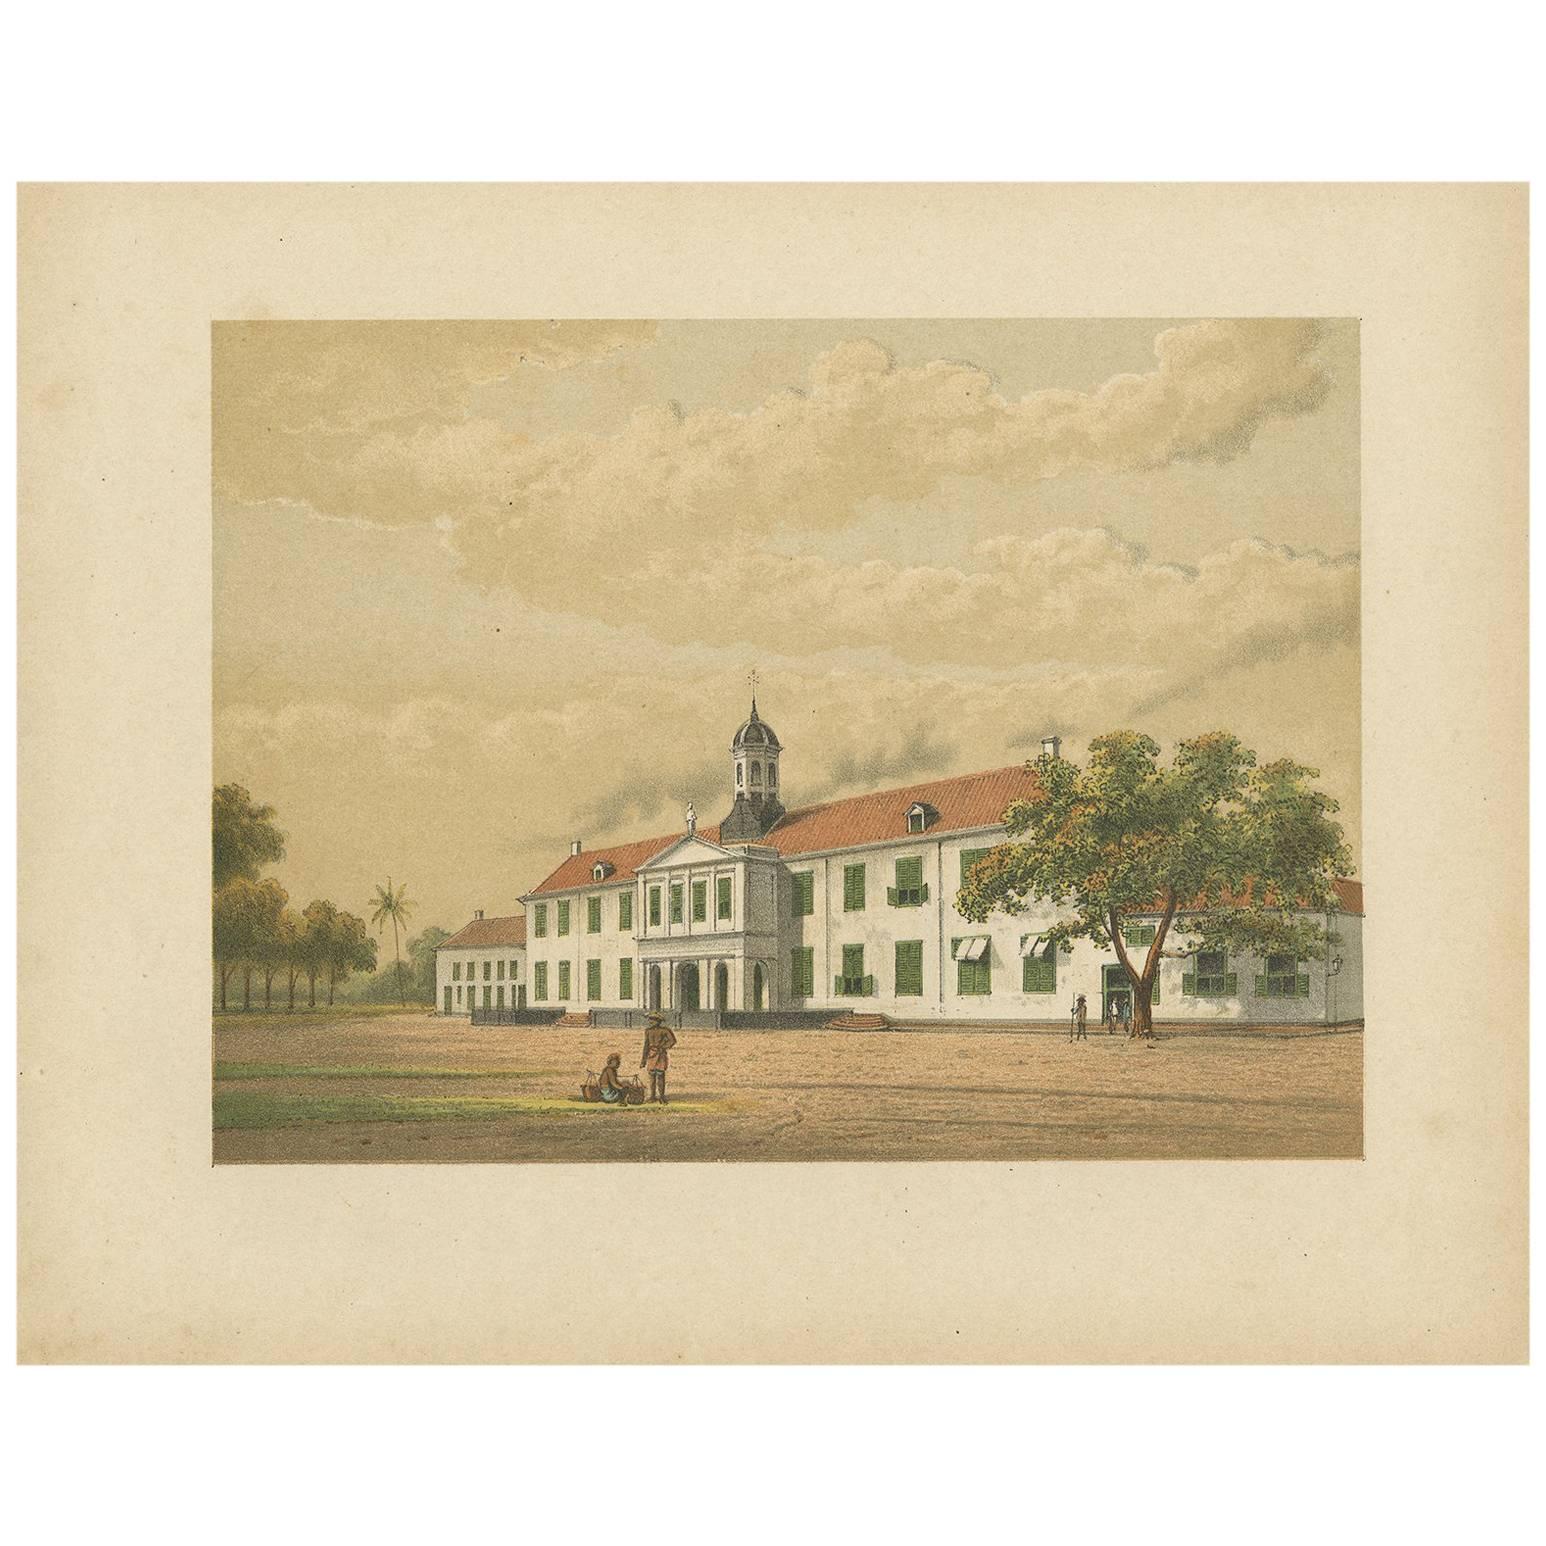 Antique Print of a Building in Batavia 'Indonesia' by M.T.H. Perelaer, 1888